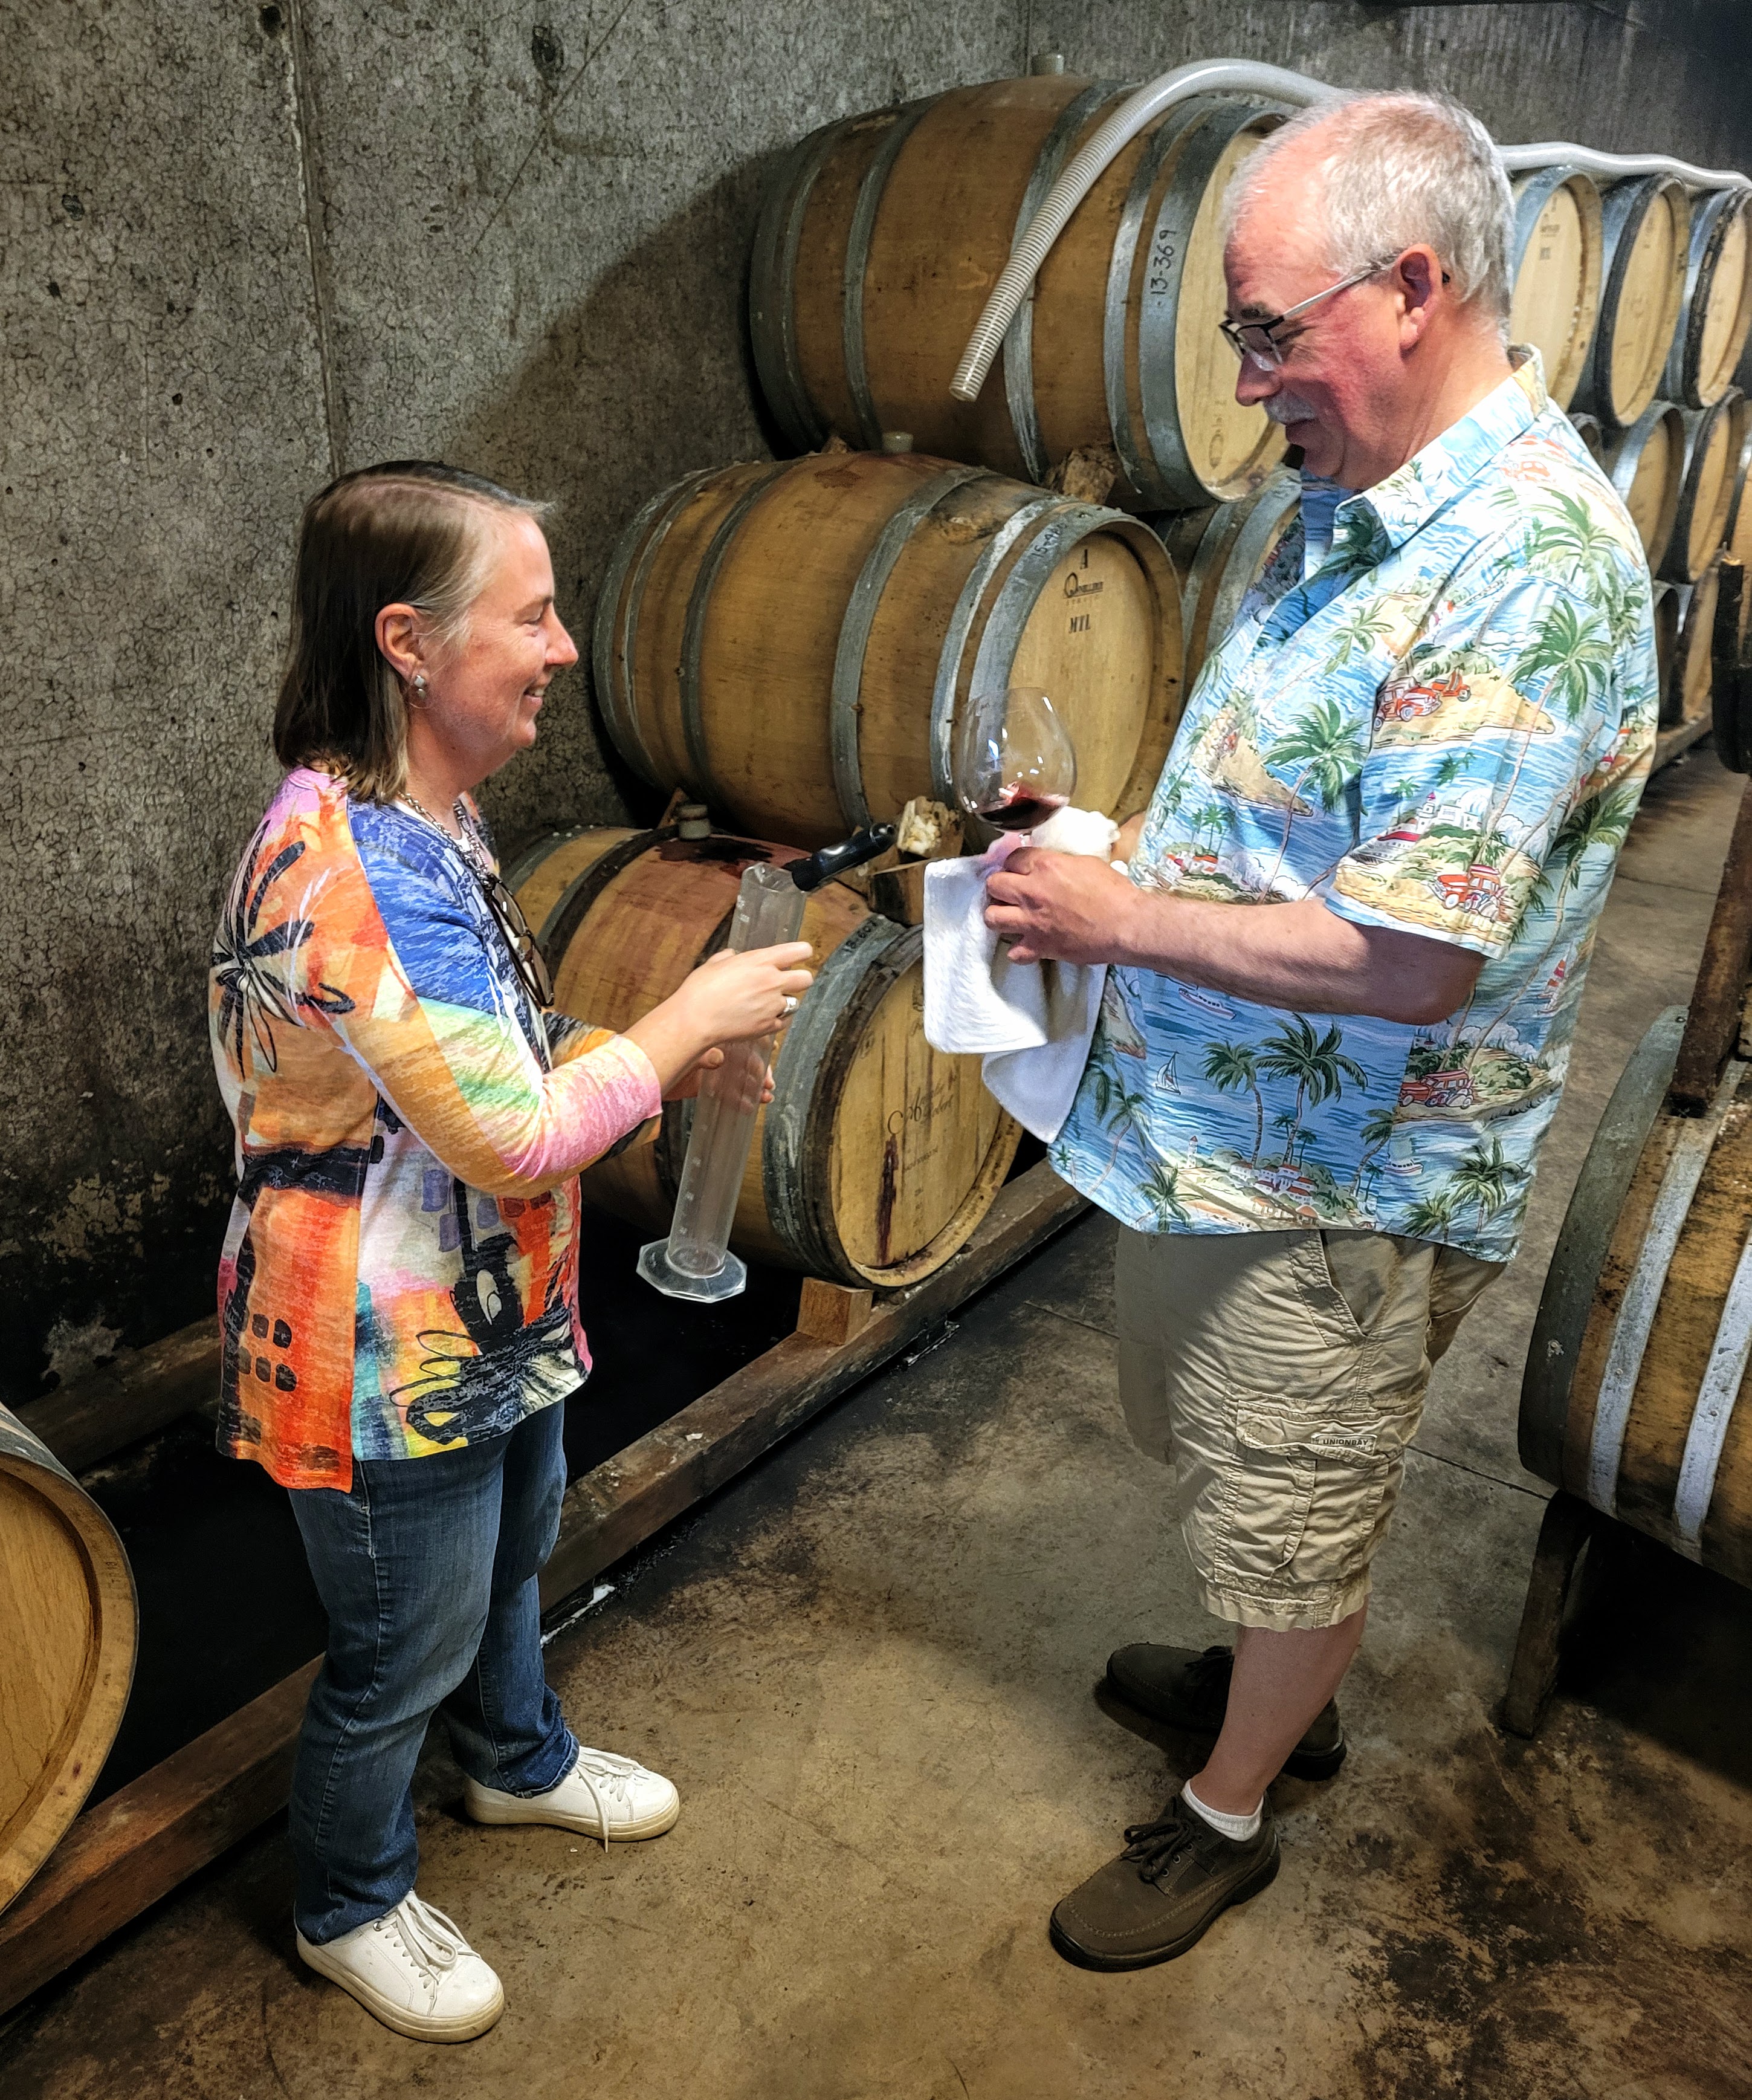 A woman and a man take a sample from a wine barrel, using a funnel-like device to transfer a sample to a beaker.